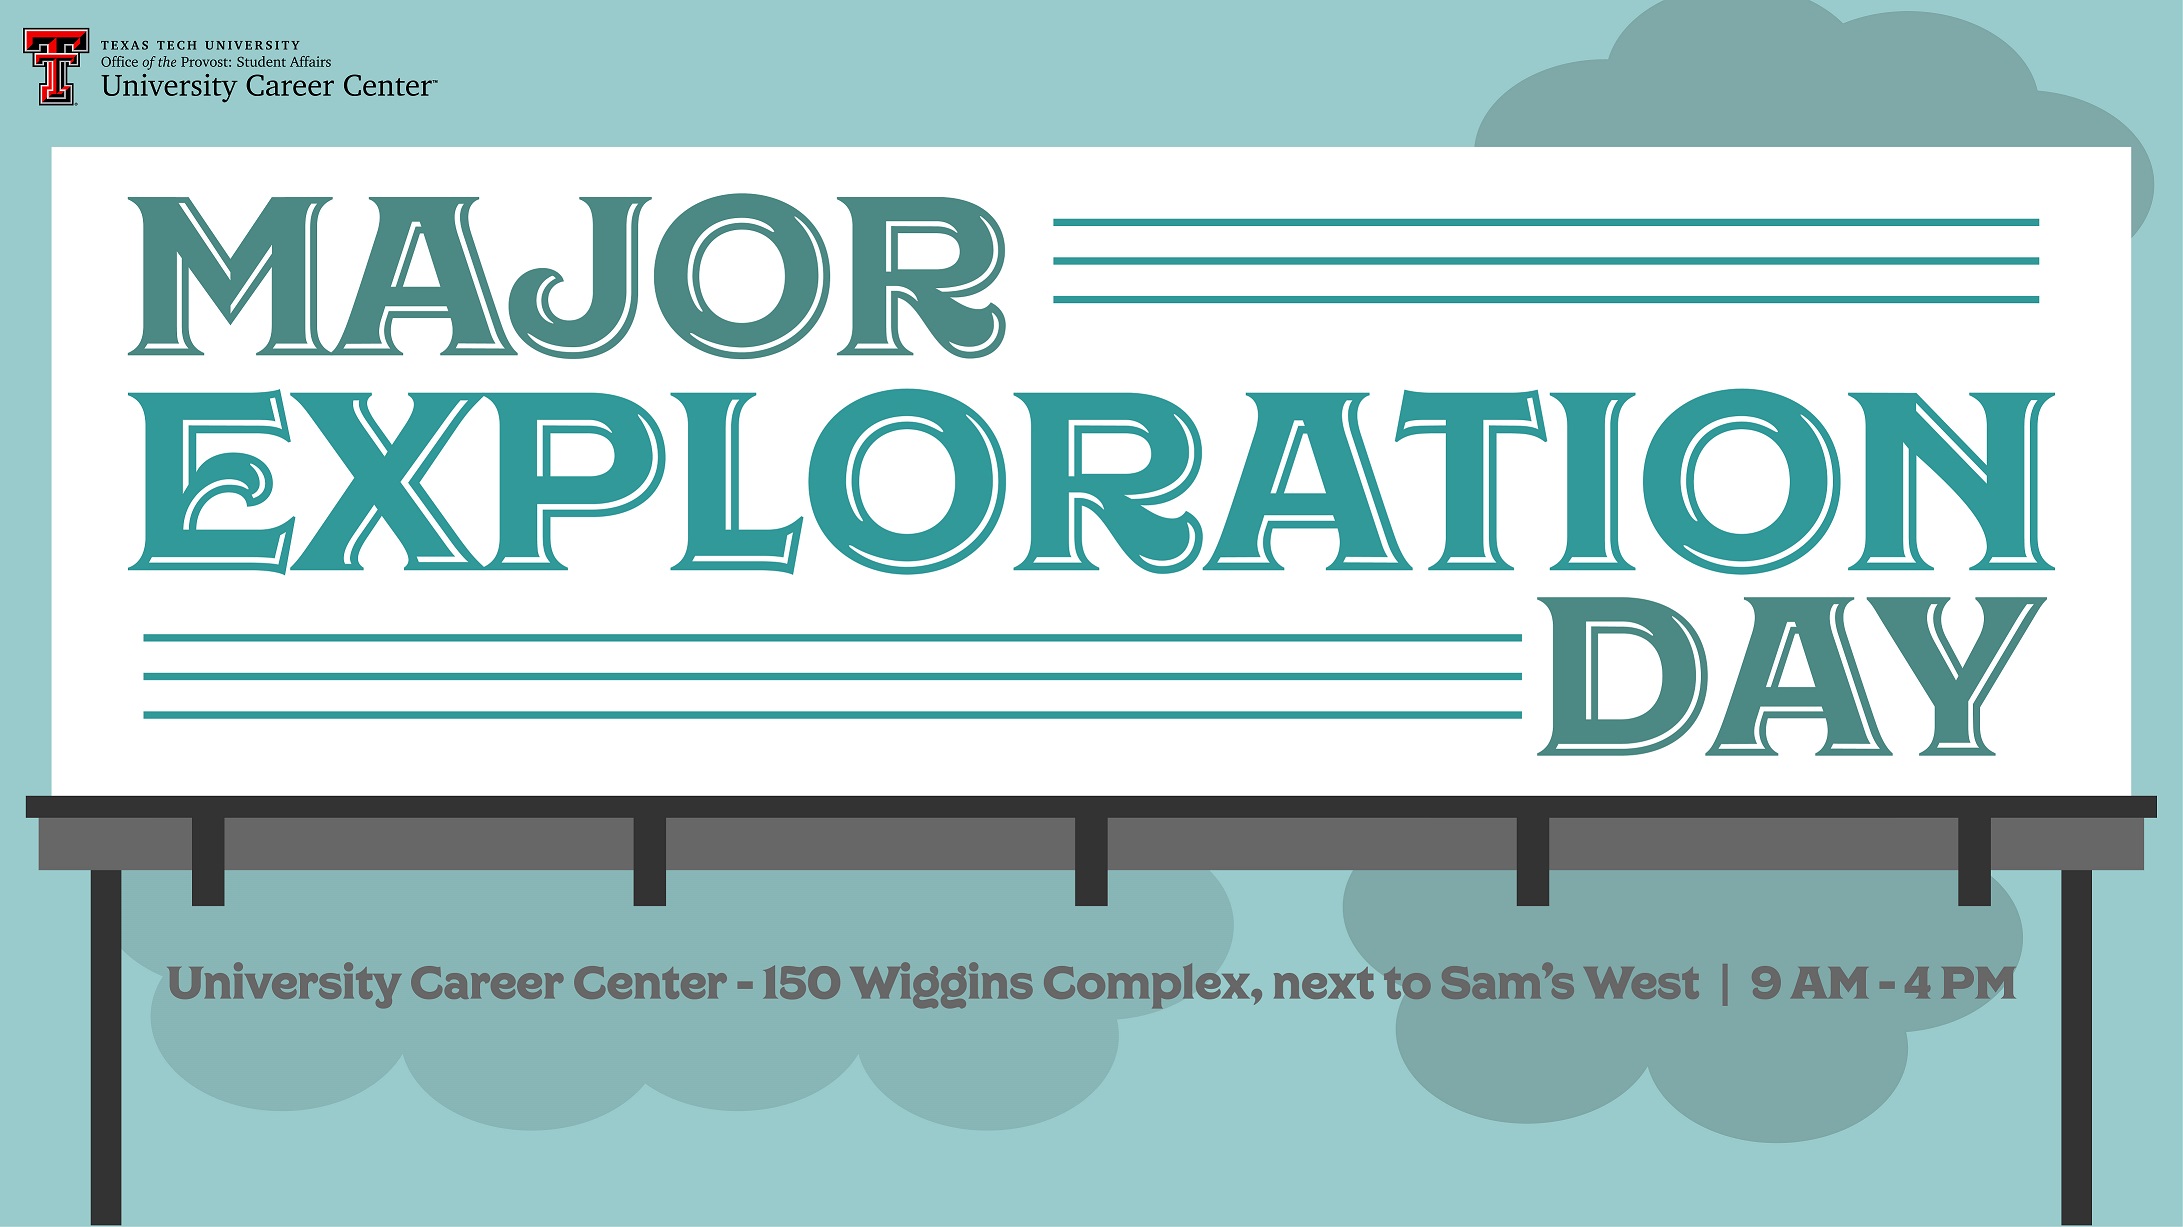 Major Exploration Day, University Career Center - 150 Wiggins Complex, next to Sam's West, 9am to 4pm